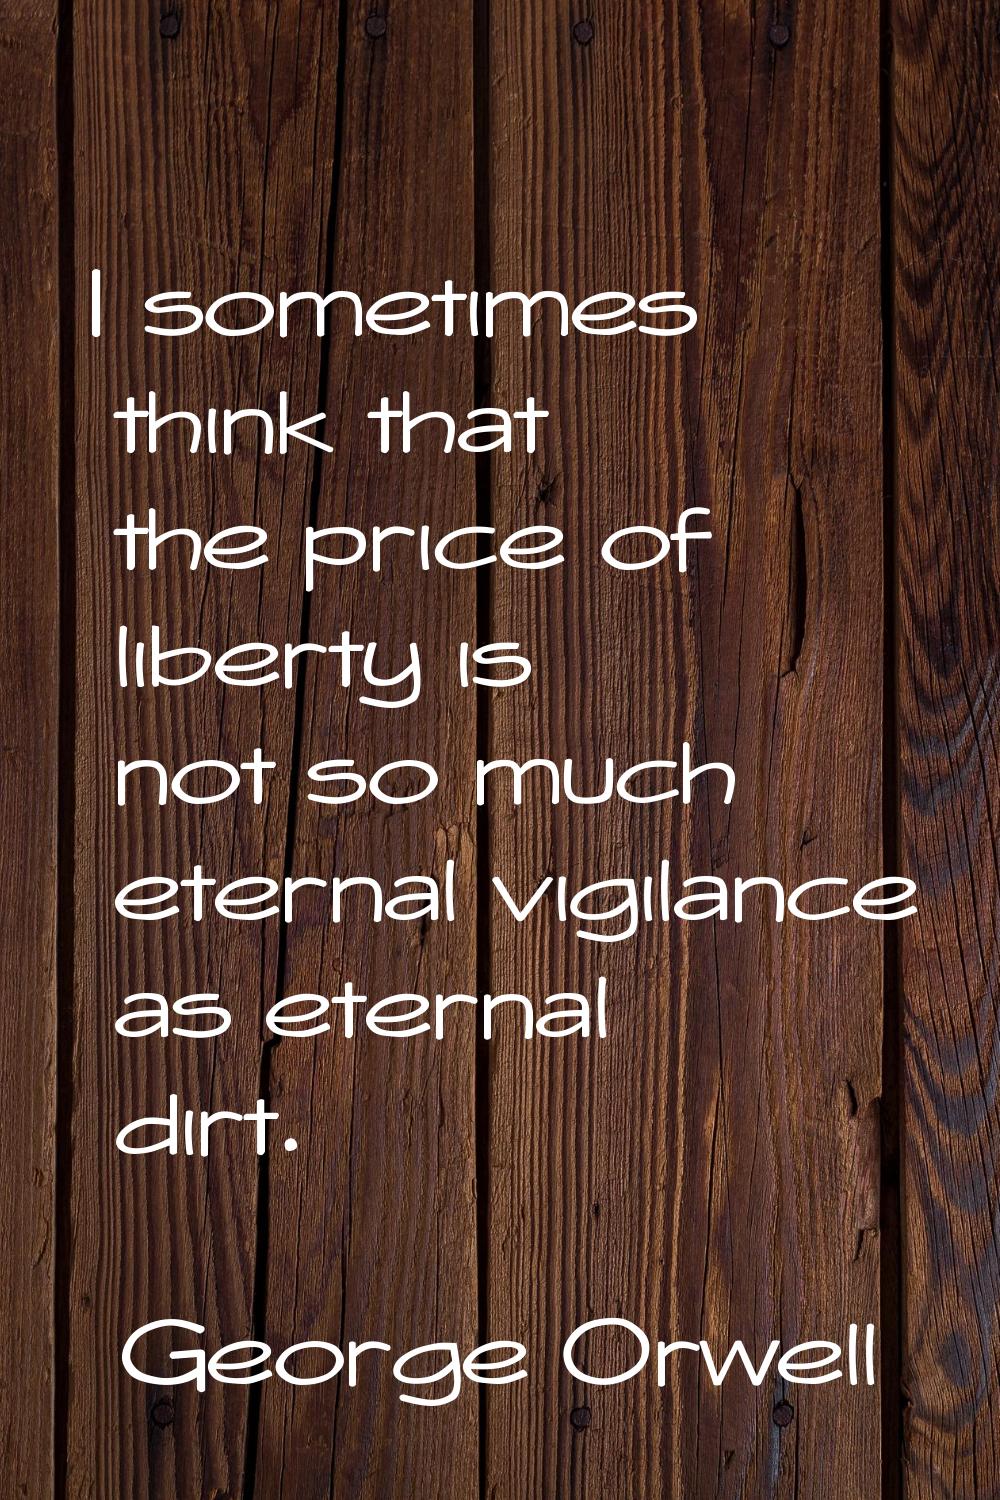 I sometimes think that the price of liberty is not so much eternal vigilance as eternal dirt.